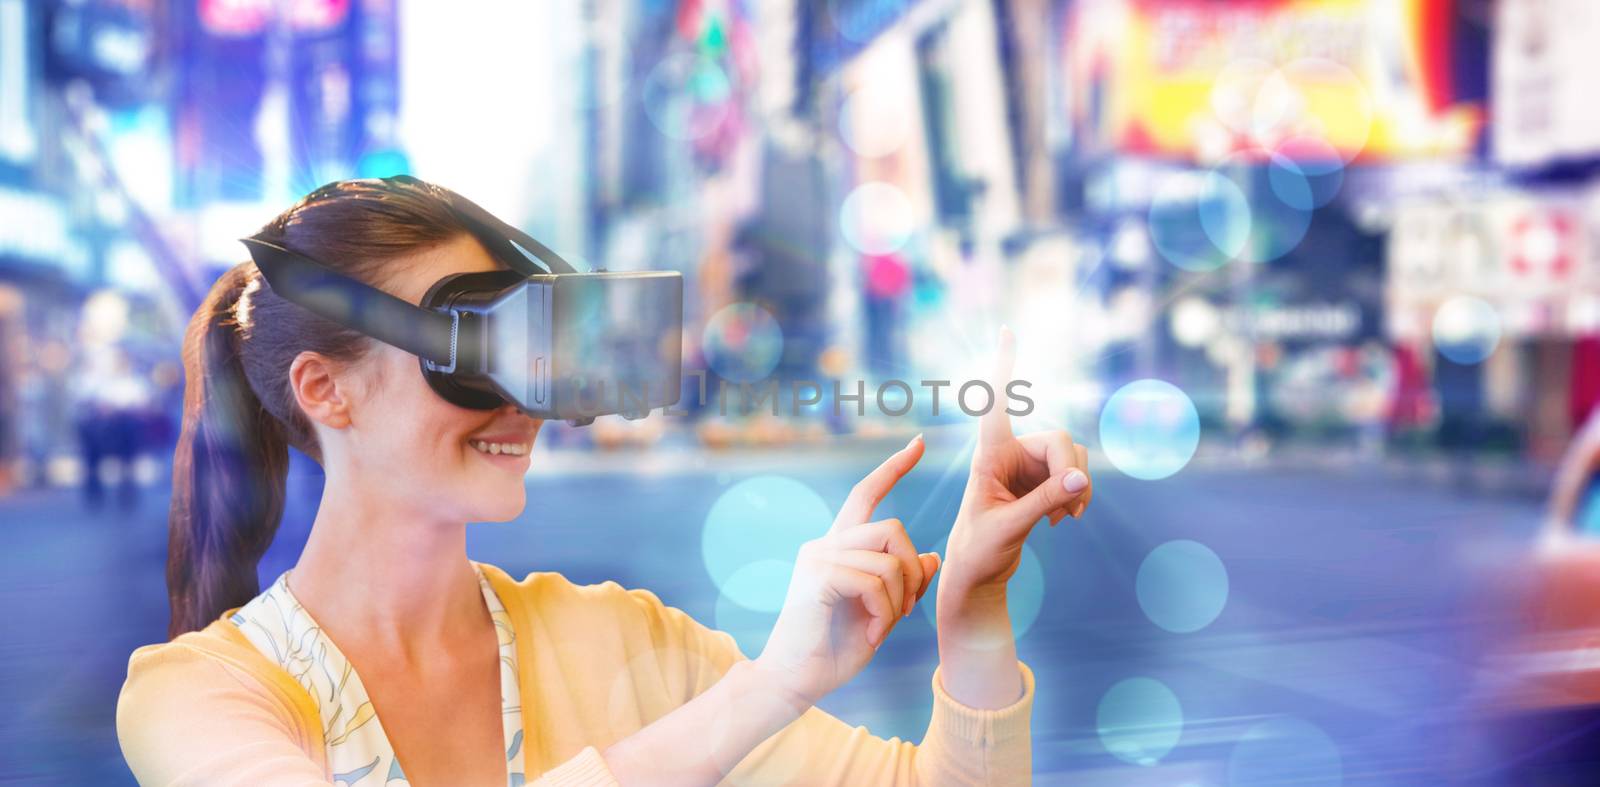 Composite image of woman using a virtual reality device by Wavebreakmedia